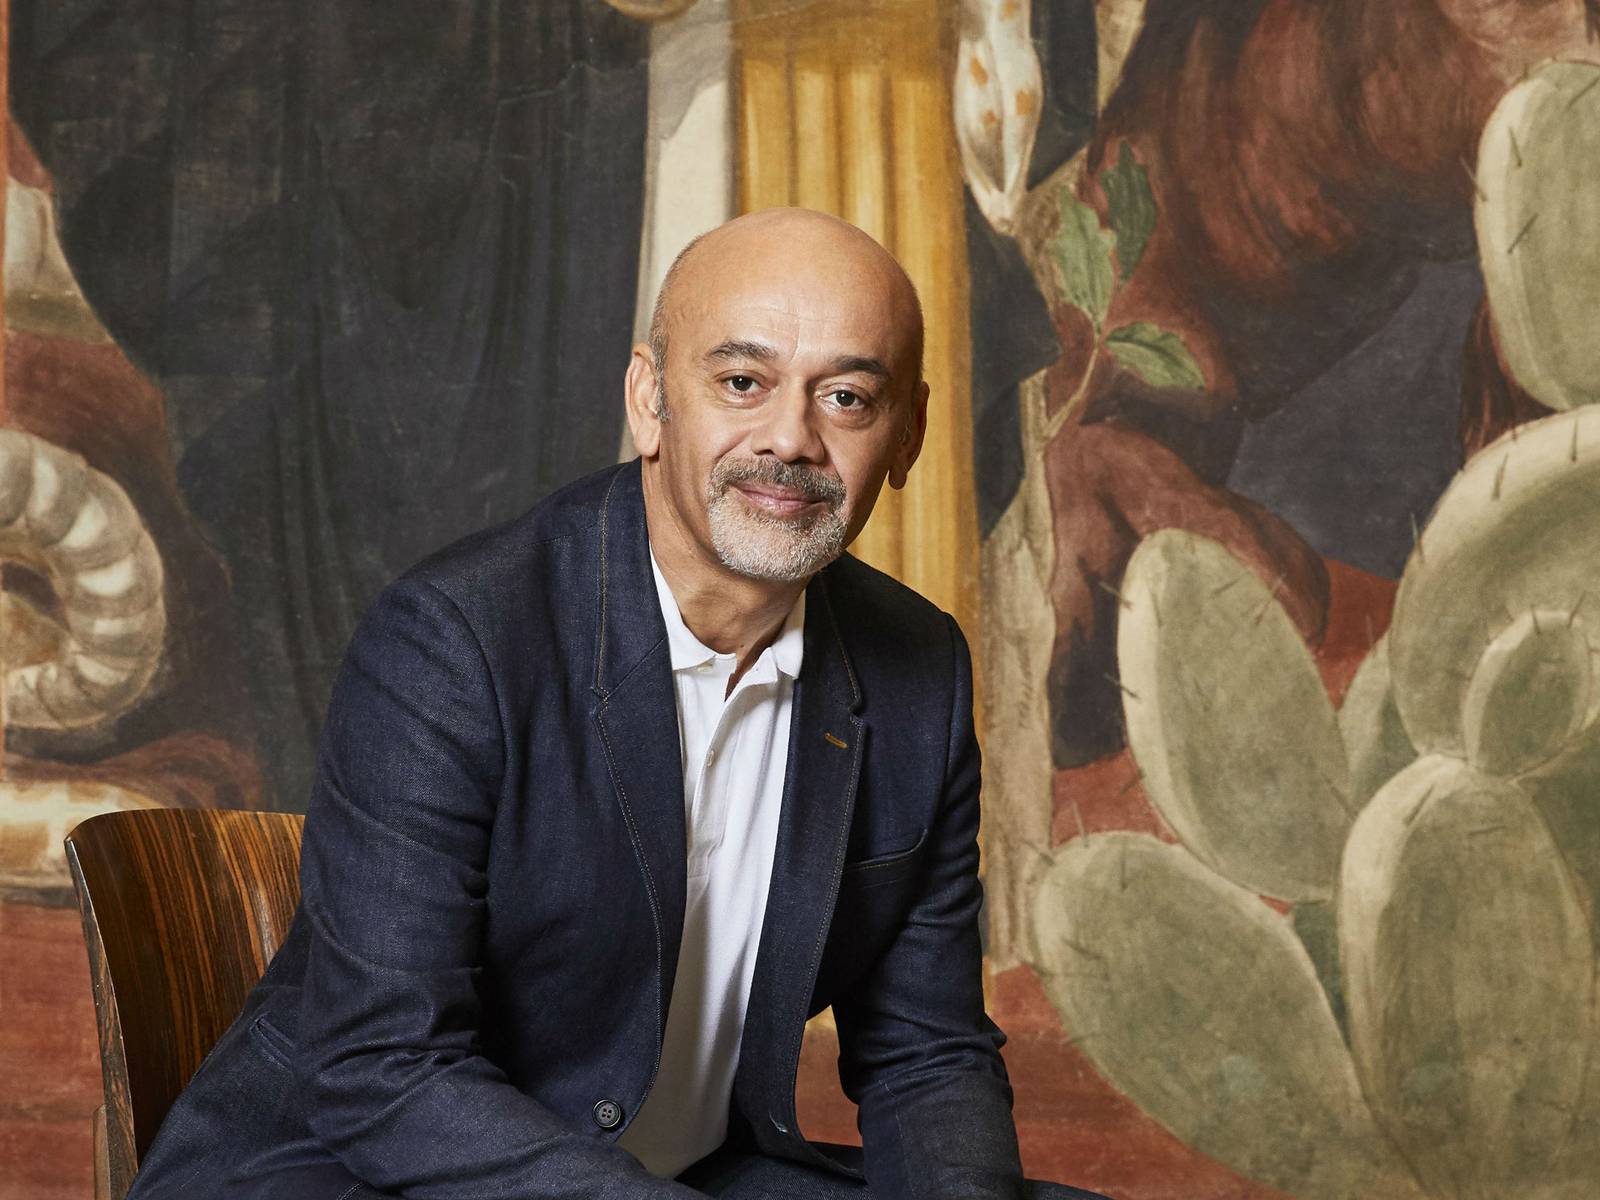 Christian Louboutin: 'If you love it, it's never too much' – The Irish Times